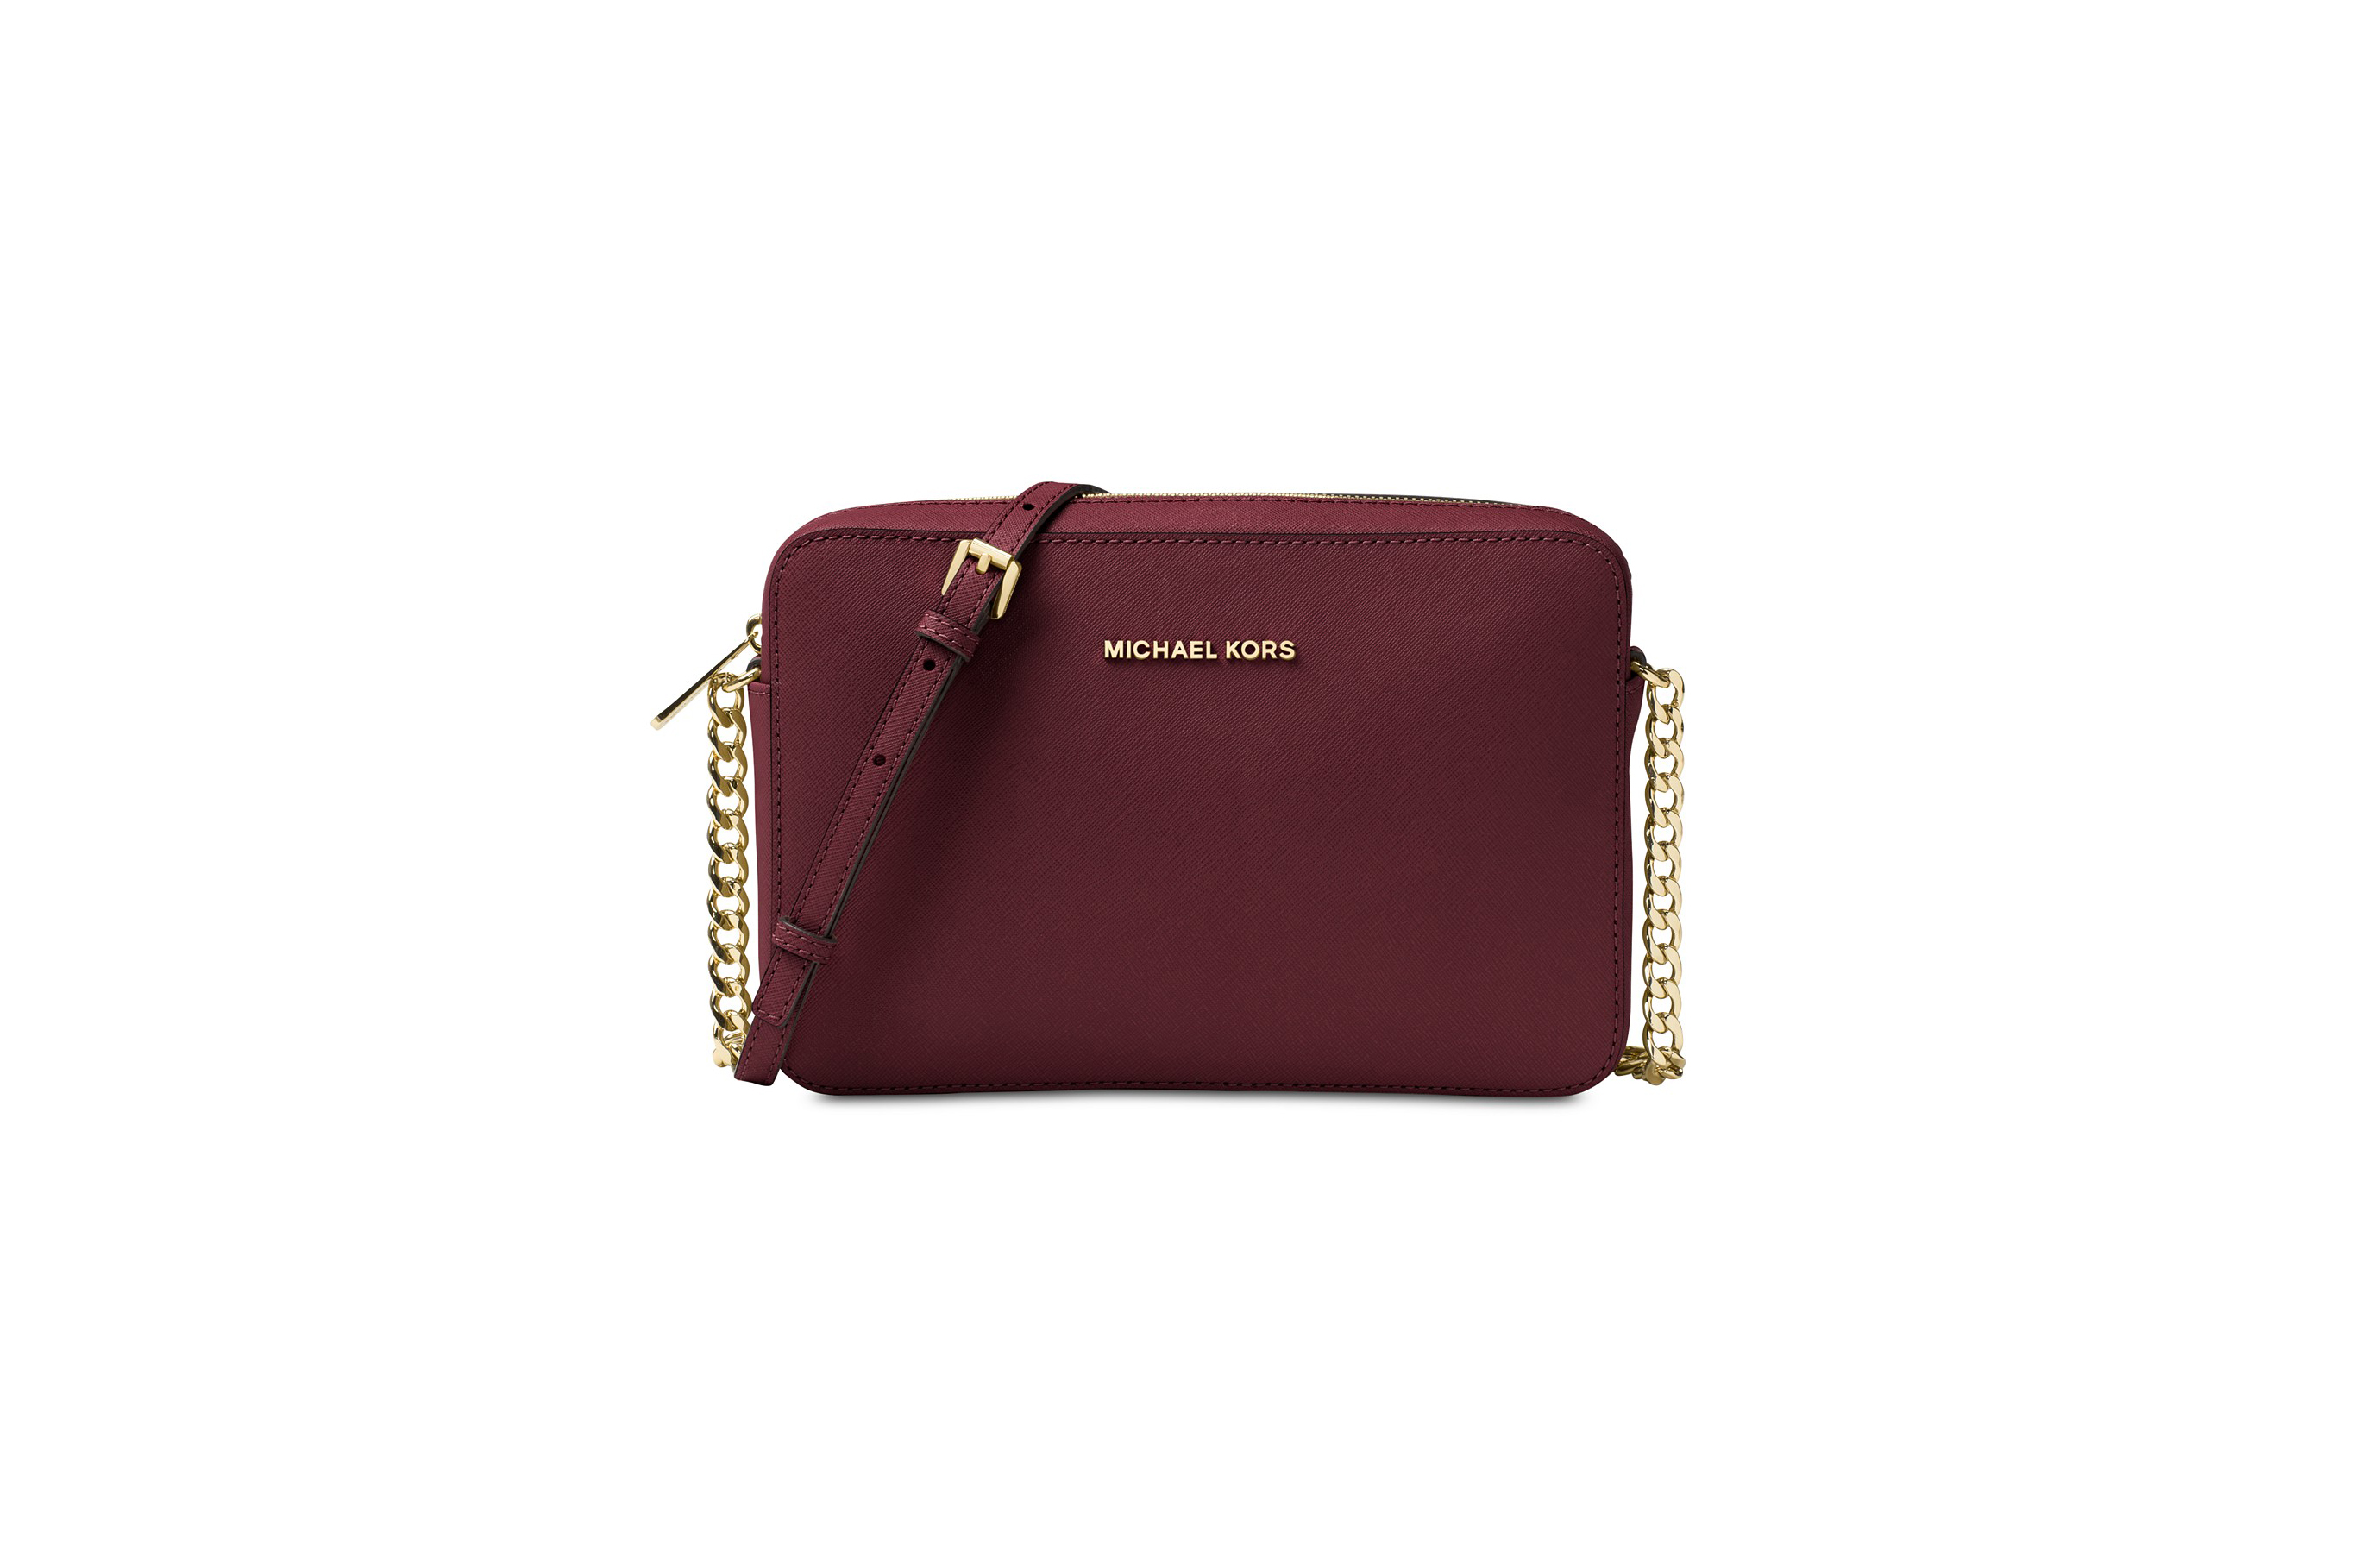 Over 1,000 Reviewers Love This $100 Michael Kors Cross-Body Purse